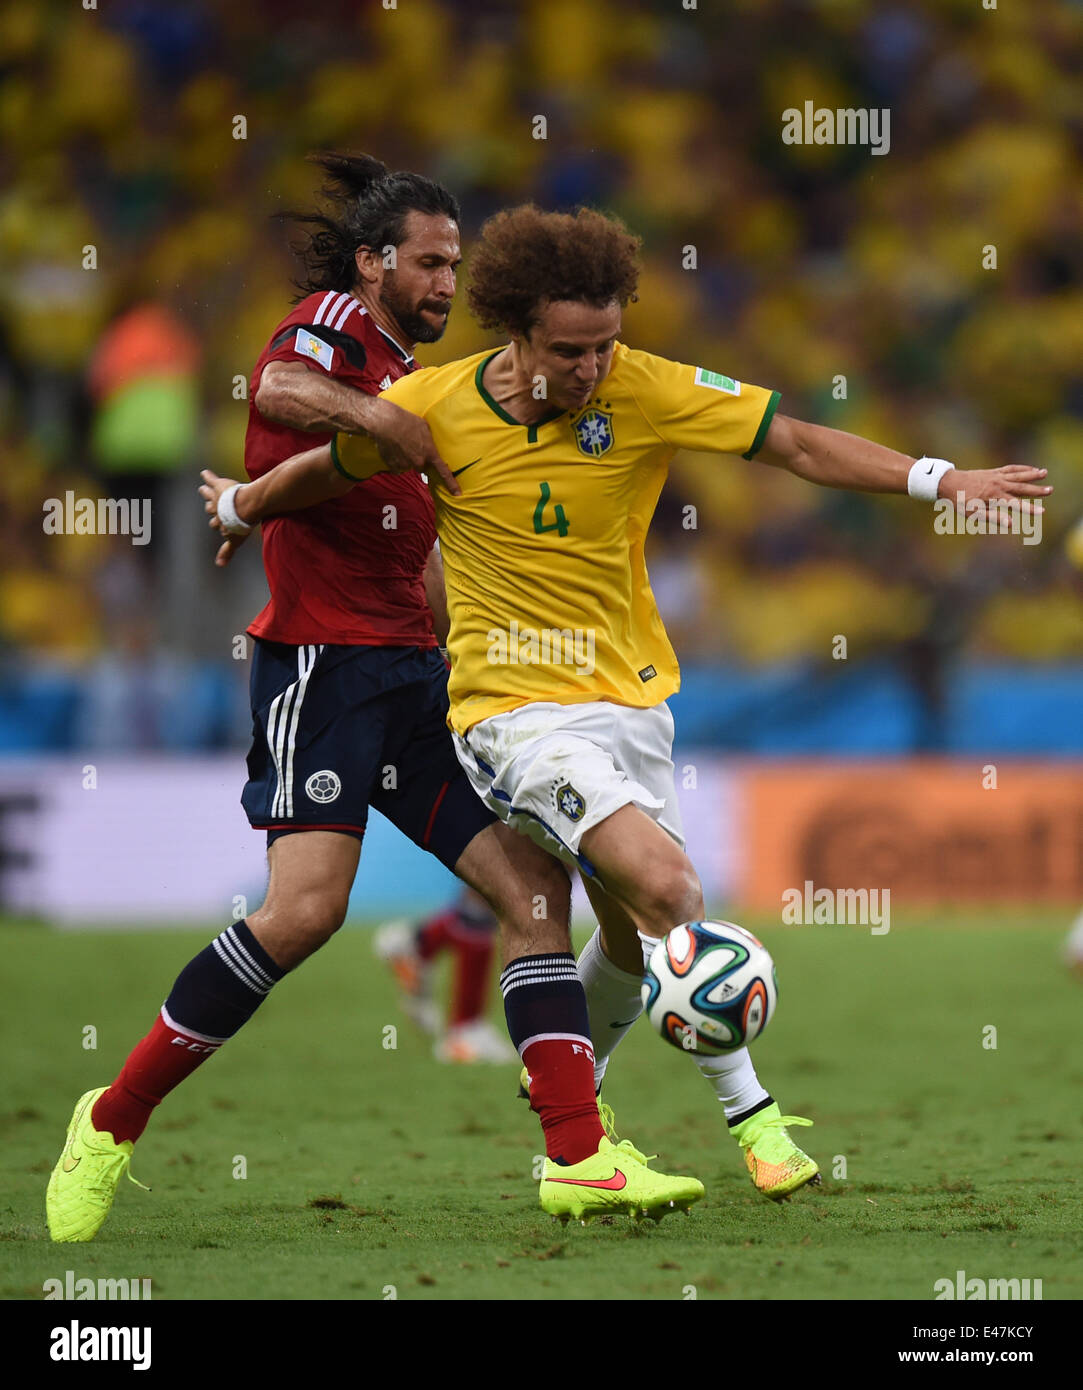 Fortaleza, Brazil. 04th July, 2014. David Luiz of Brazil and Mario Yepes (L) of Colombia vie for the ball during the FIFA World Cup 2014 quarter final match soccer between Brazil and Colombia at the Estadio Castelao in Fortaleza, Brazil, 04 July 2014. Photo: Marius Becker/dpa/Alamy Live News Stock Photo